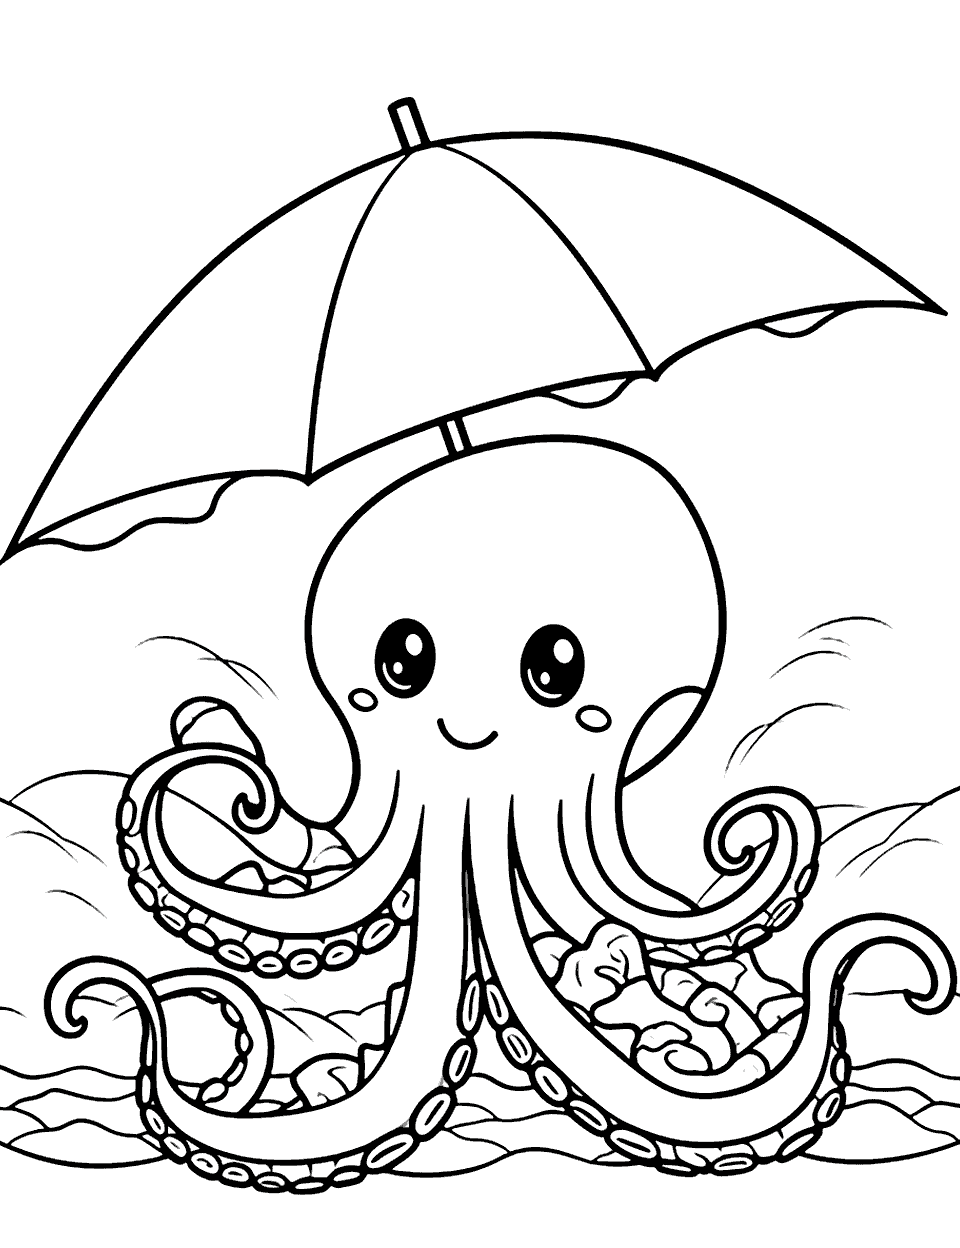 Beach Day for Octopus Coloring Page - A cheerful octopus sitting under an umbrella on the beach.